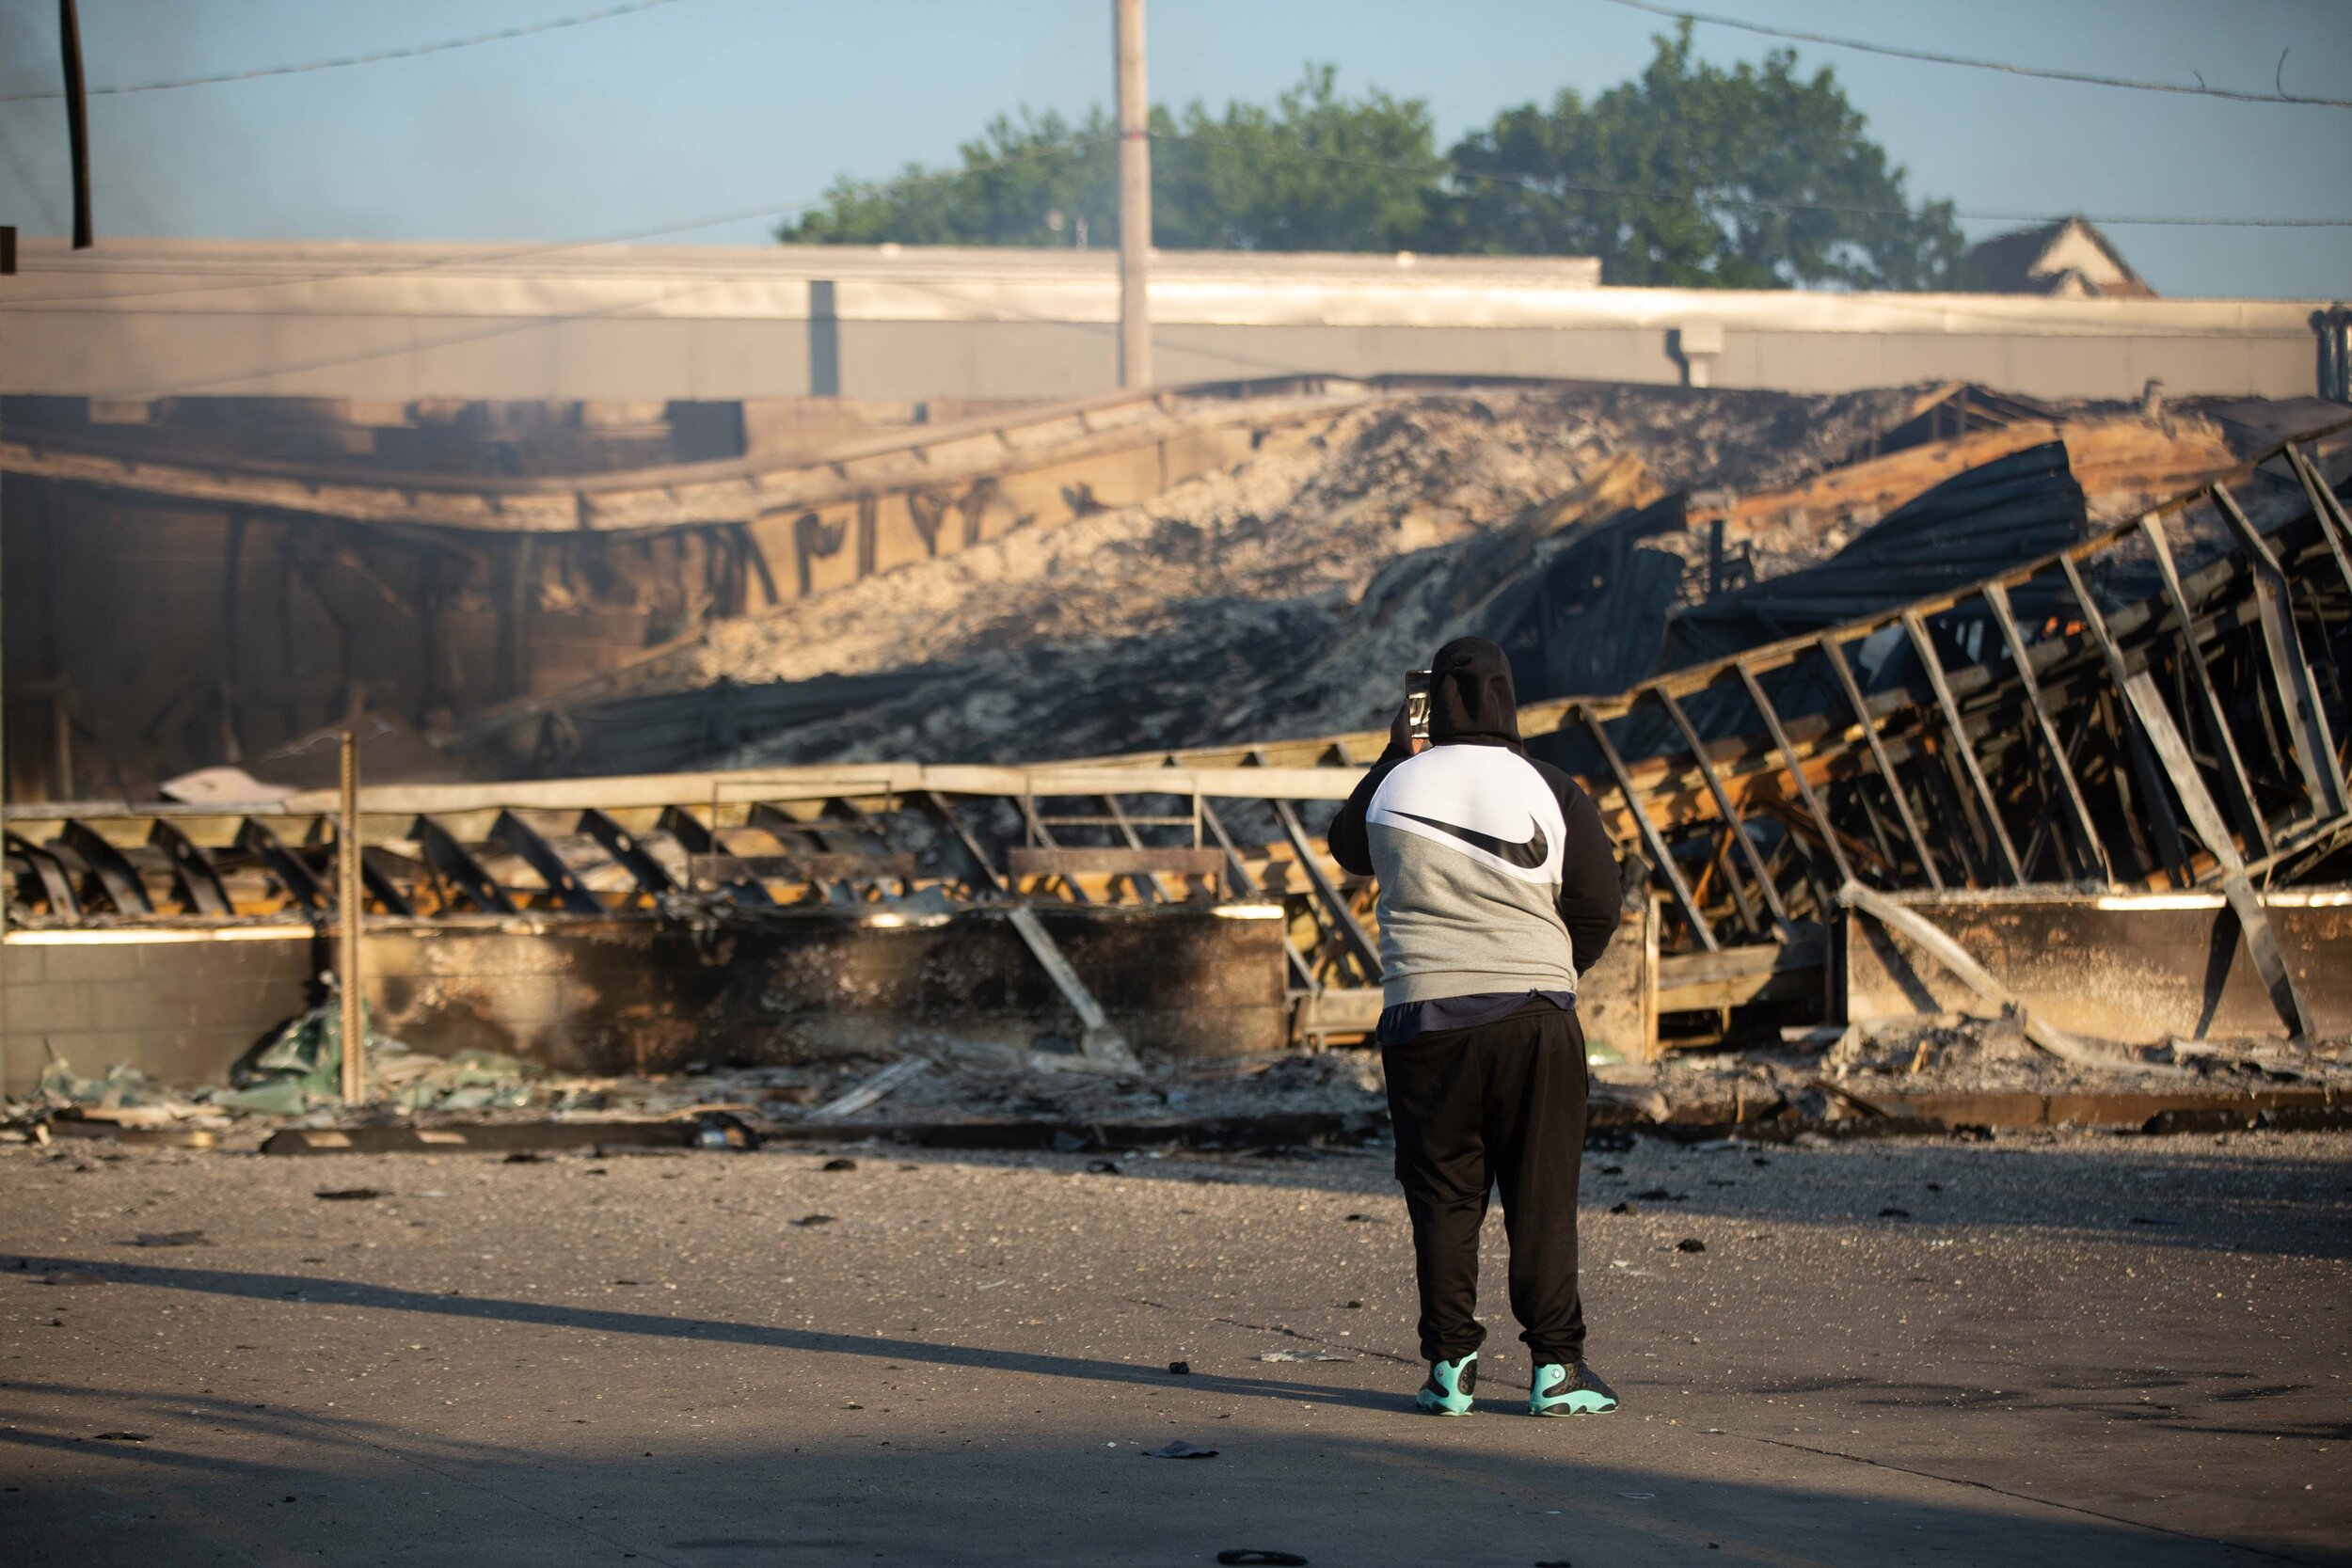  A man takes a video on his cell phone of a Auto Zone that burned down on Lake Street in Minneapolis, Minnesota during a riot over the police killing of Geoge Floyd on May 30, 2020. Chris Juhn/Zuma. 